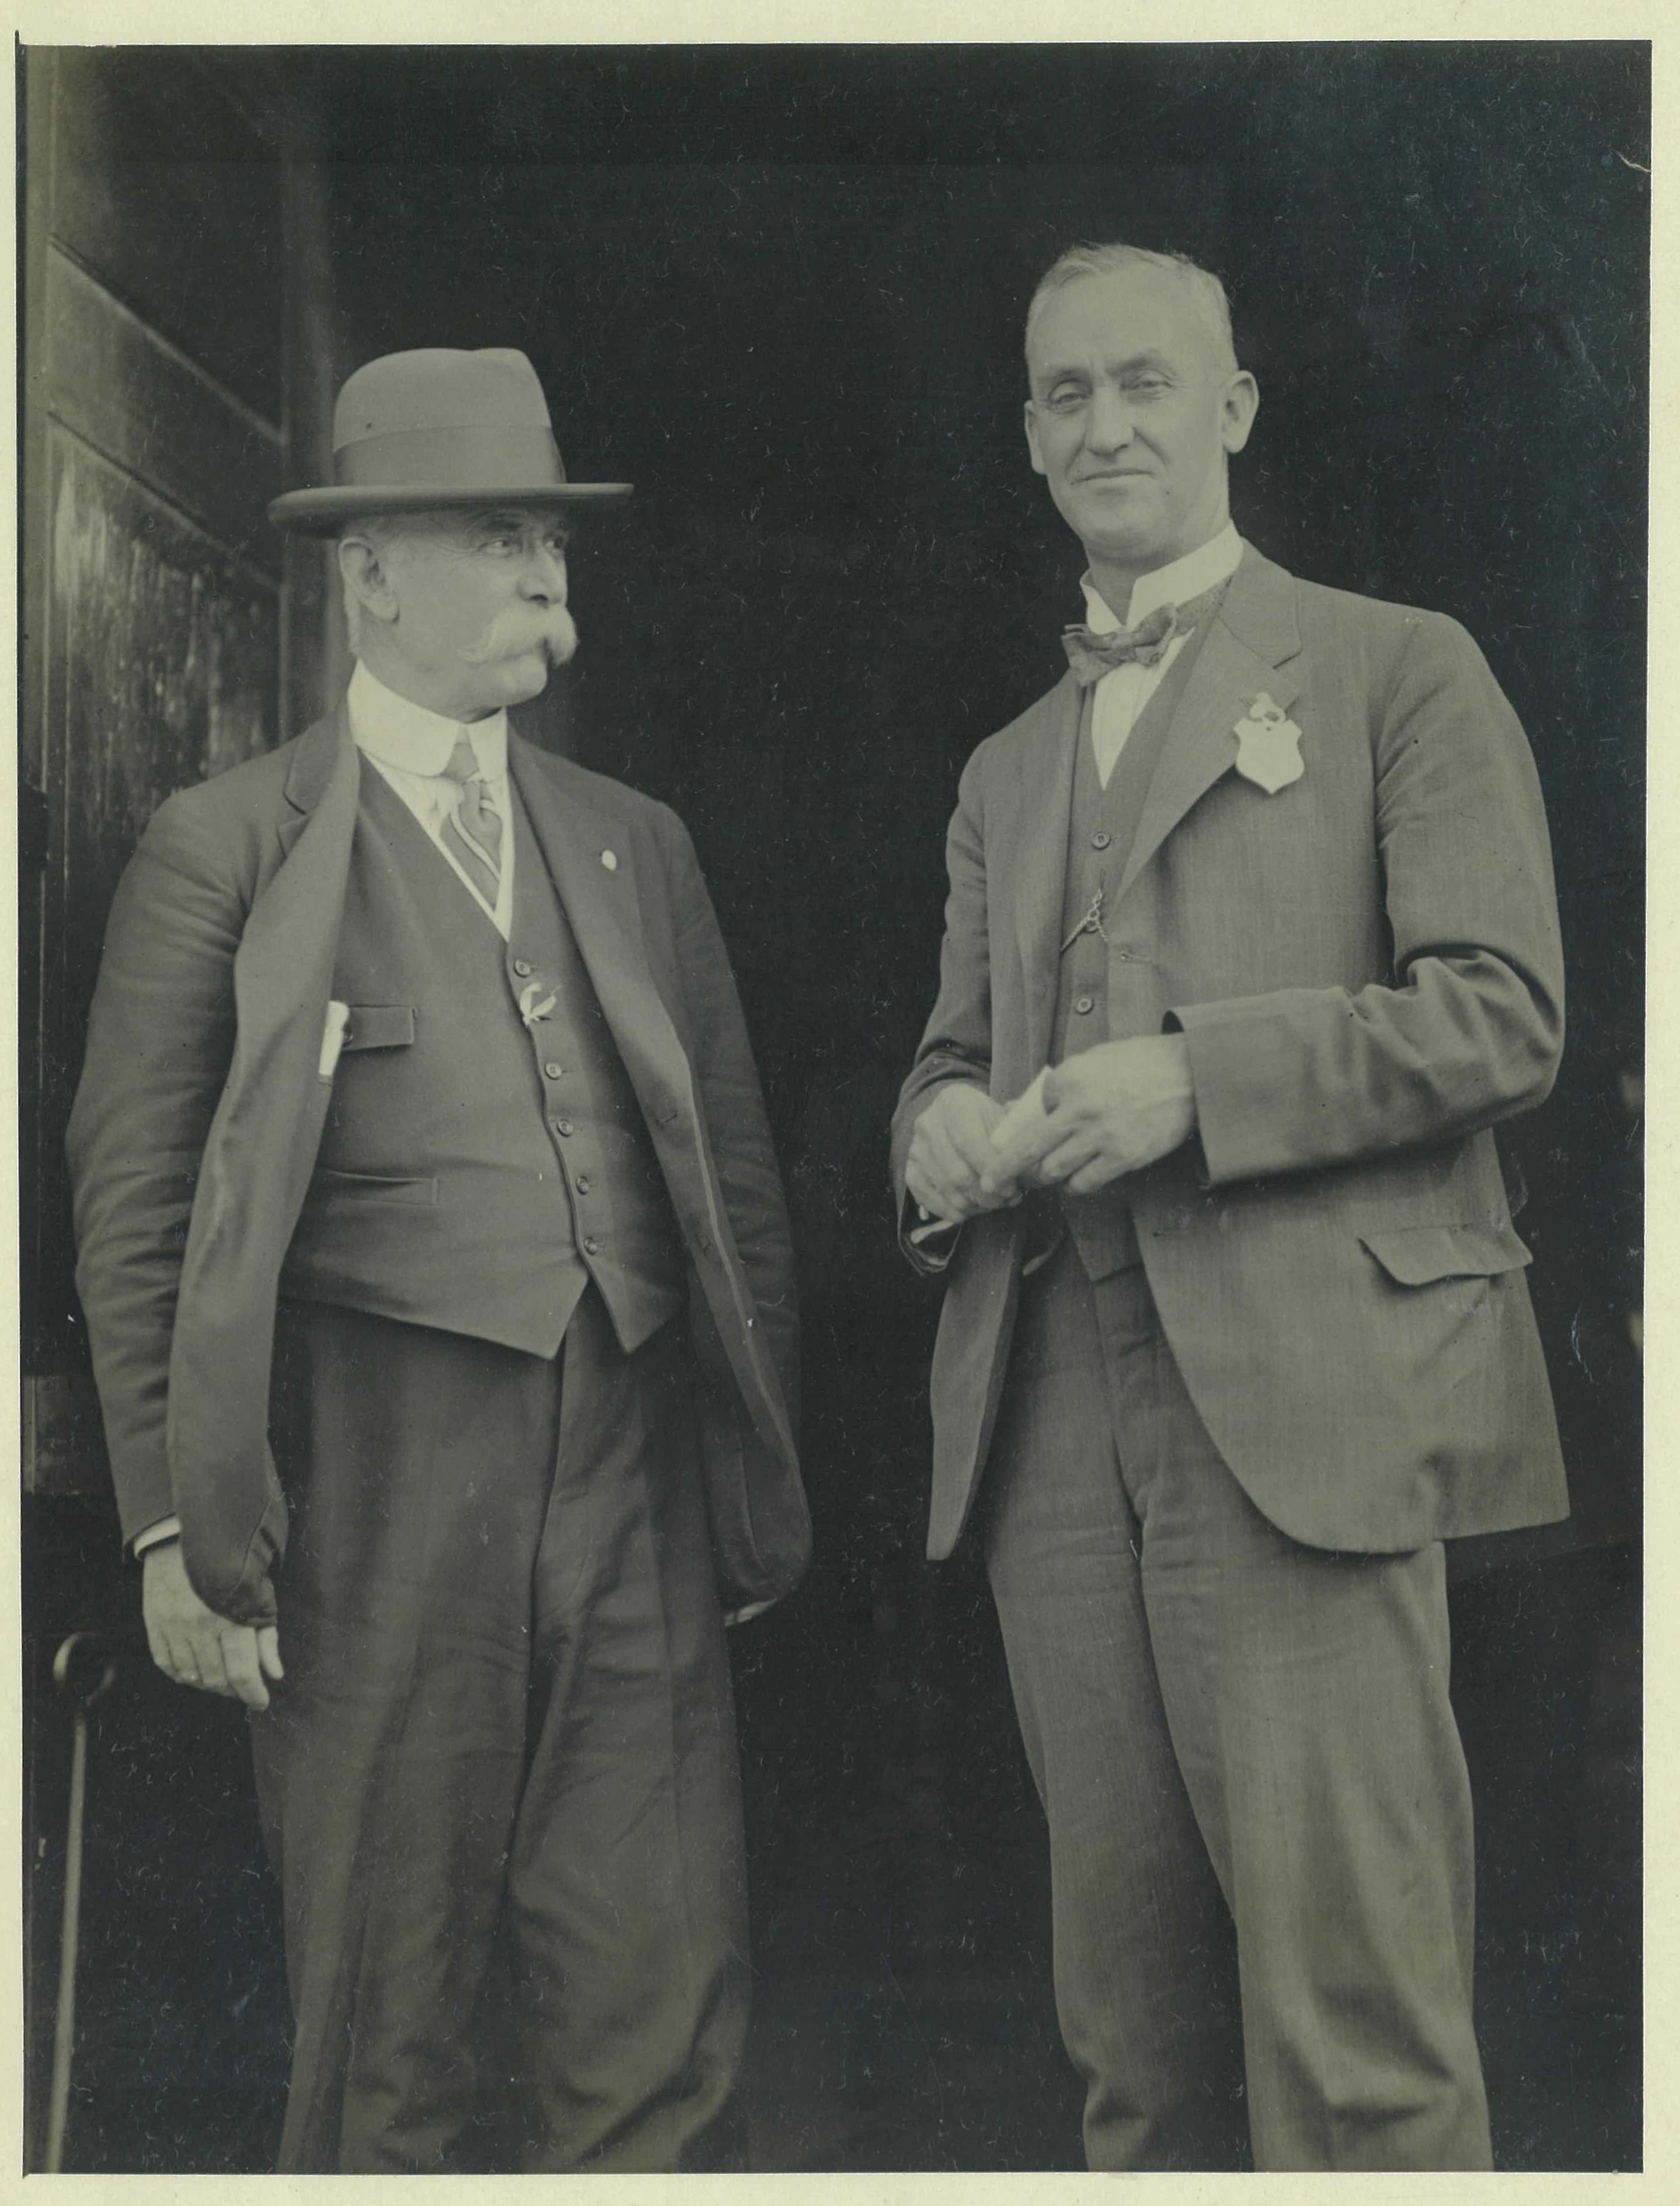 Col. Sir Charles Merrett (L), President of the RASV, and Henry Schwieger, Secretary-Manager of the RASV. Image source: Melbourne Royal Heritage Collection 13208, donated by Rod Wilson.